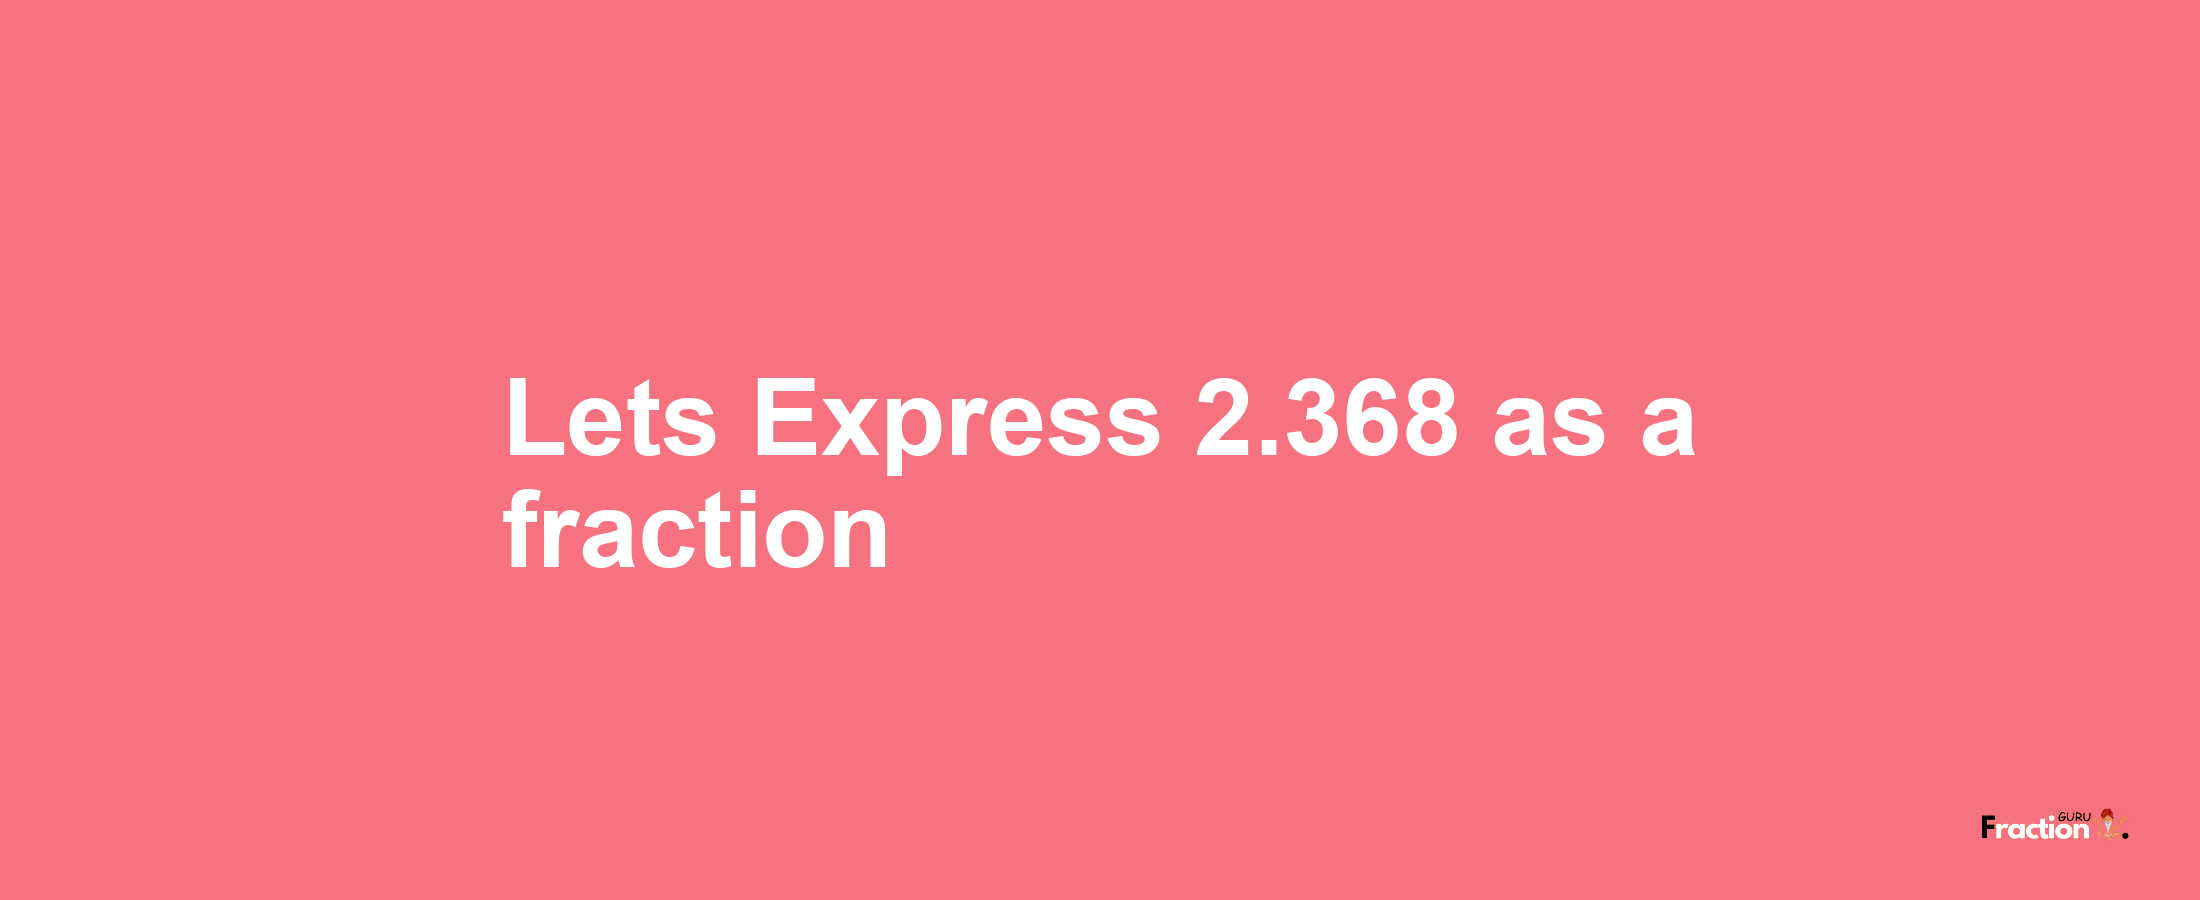 Lets Express 2.368 as afraction